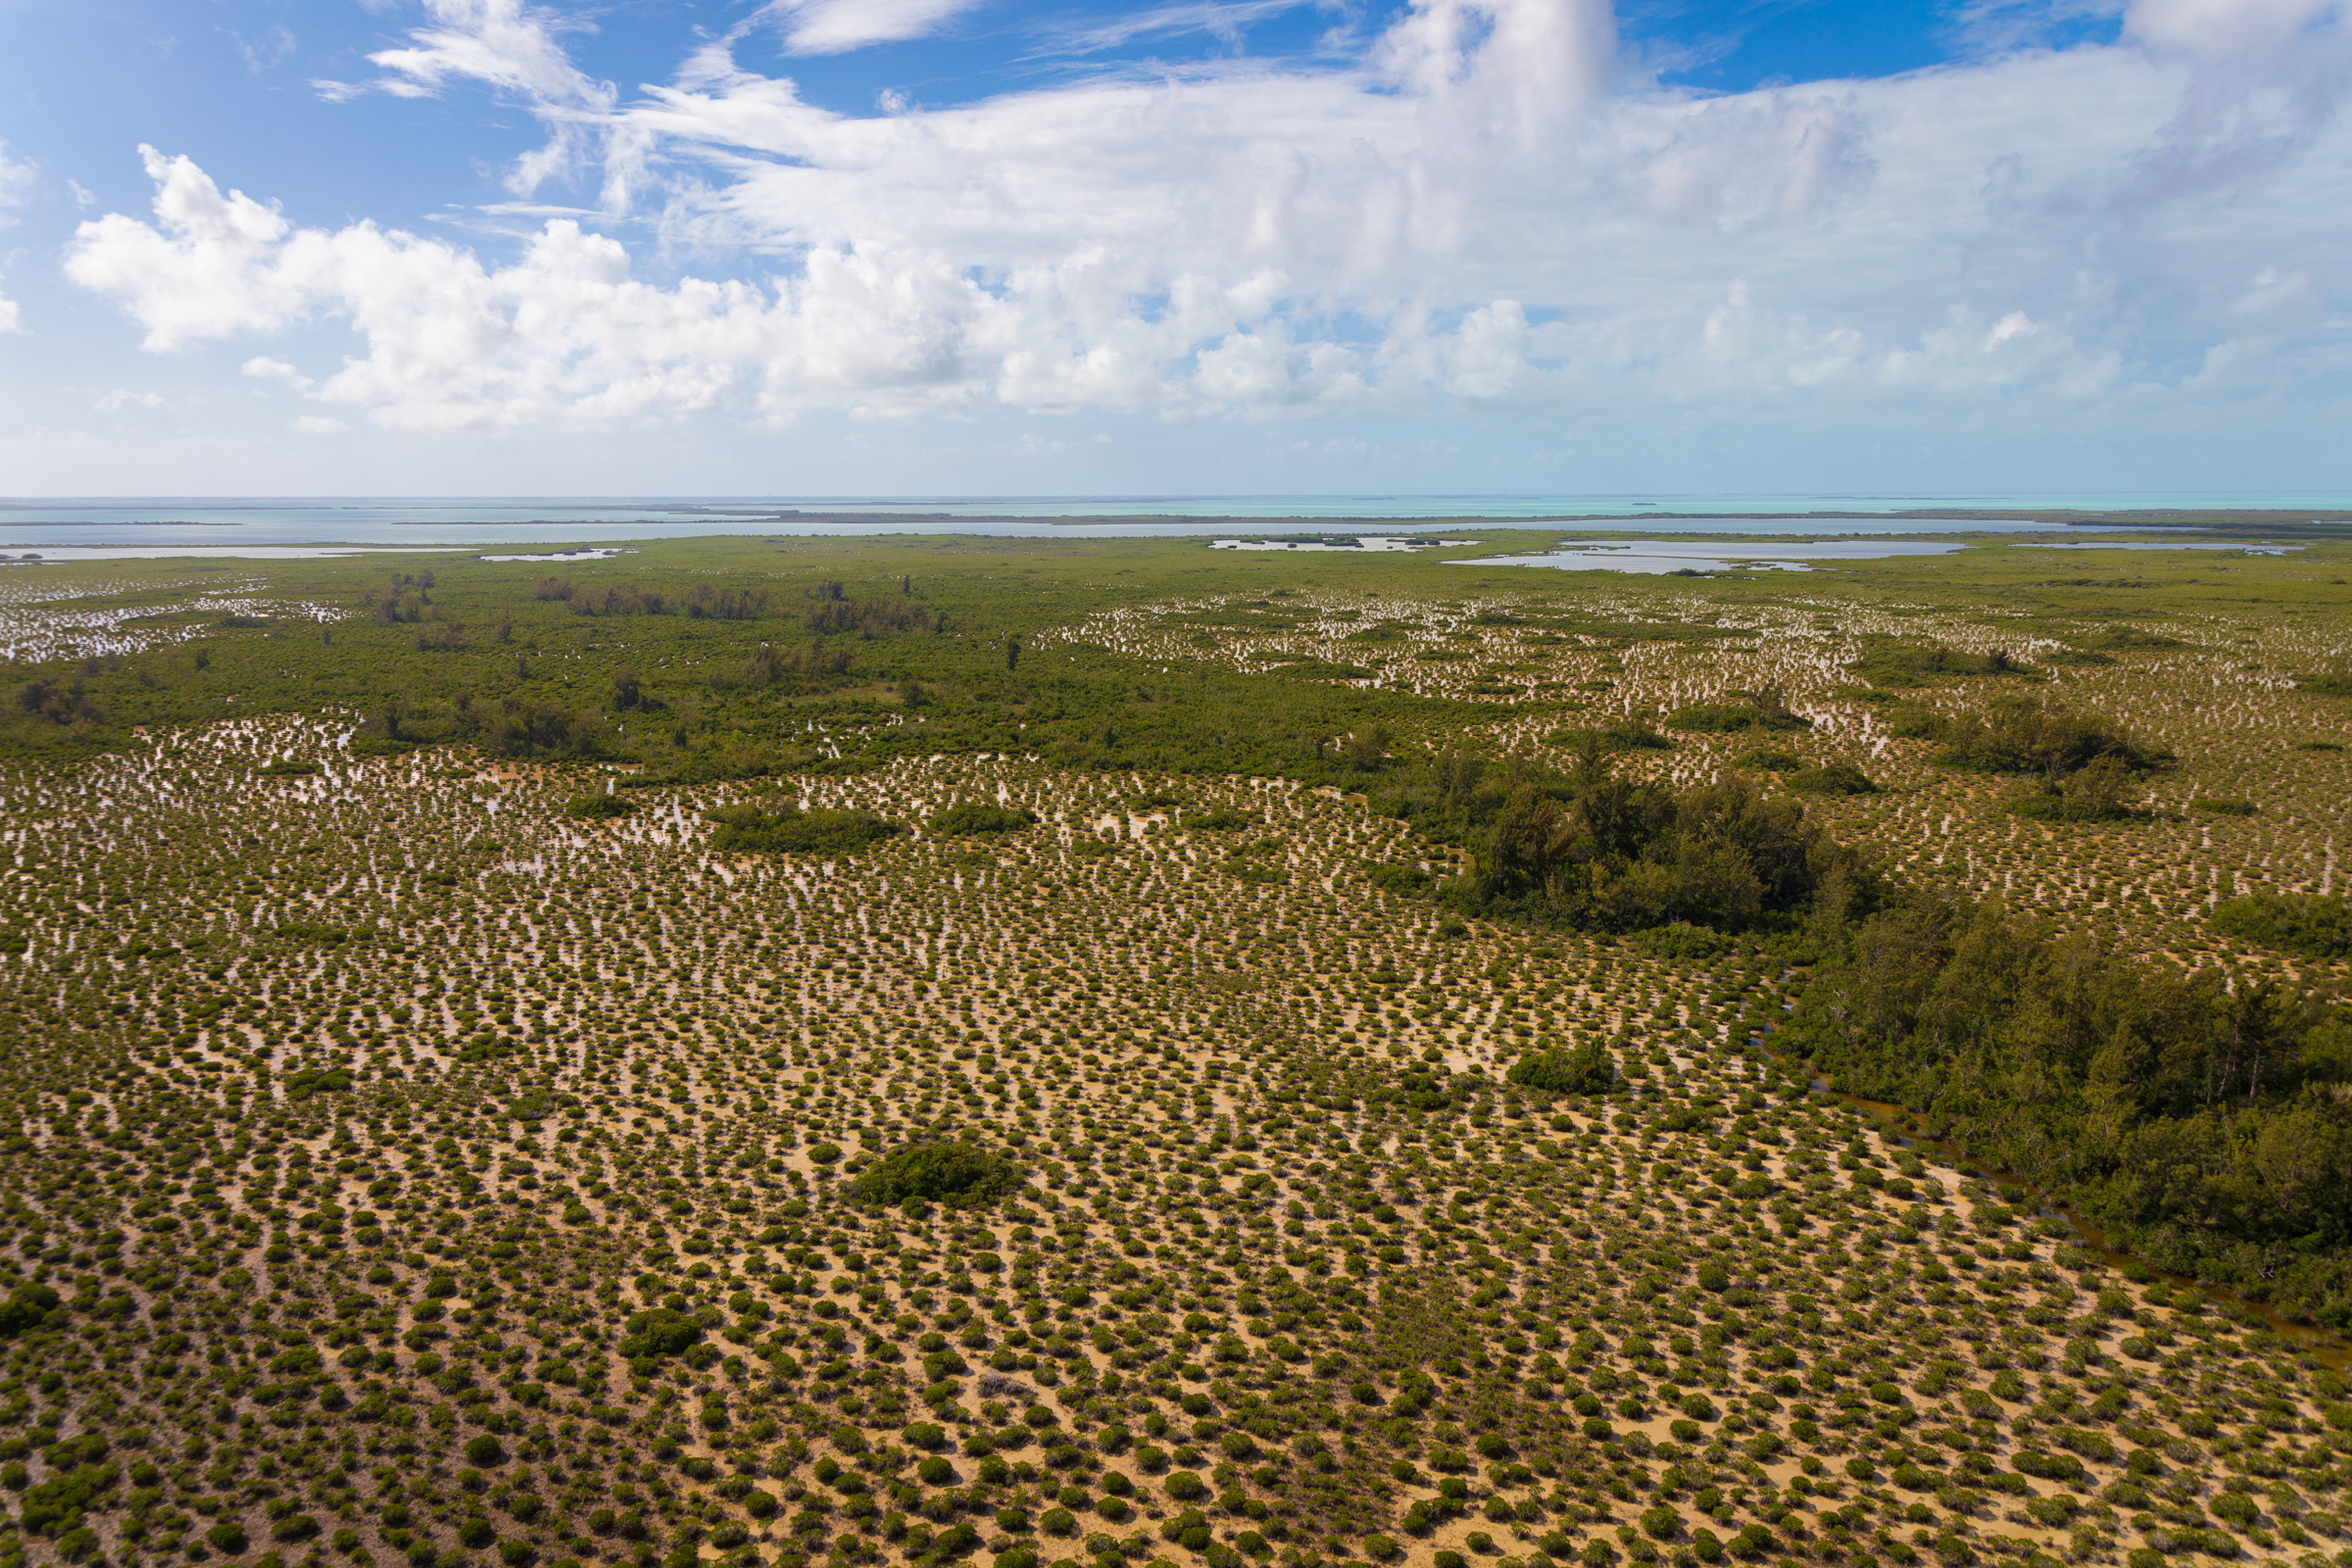 Aerial view of the grassy saline glades interspersed with clumps of short trees. Wispy Australian Pine tress tower over the other vegetation.